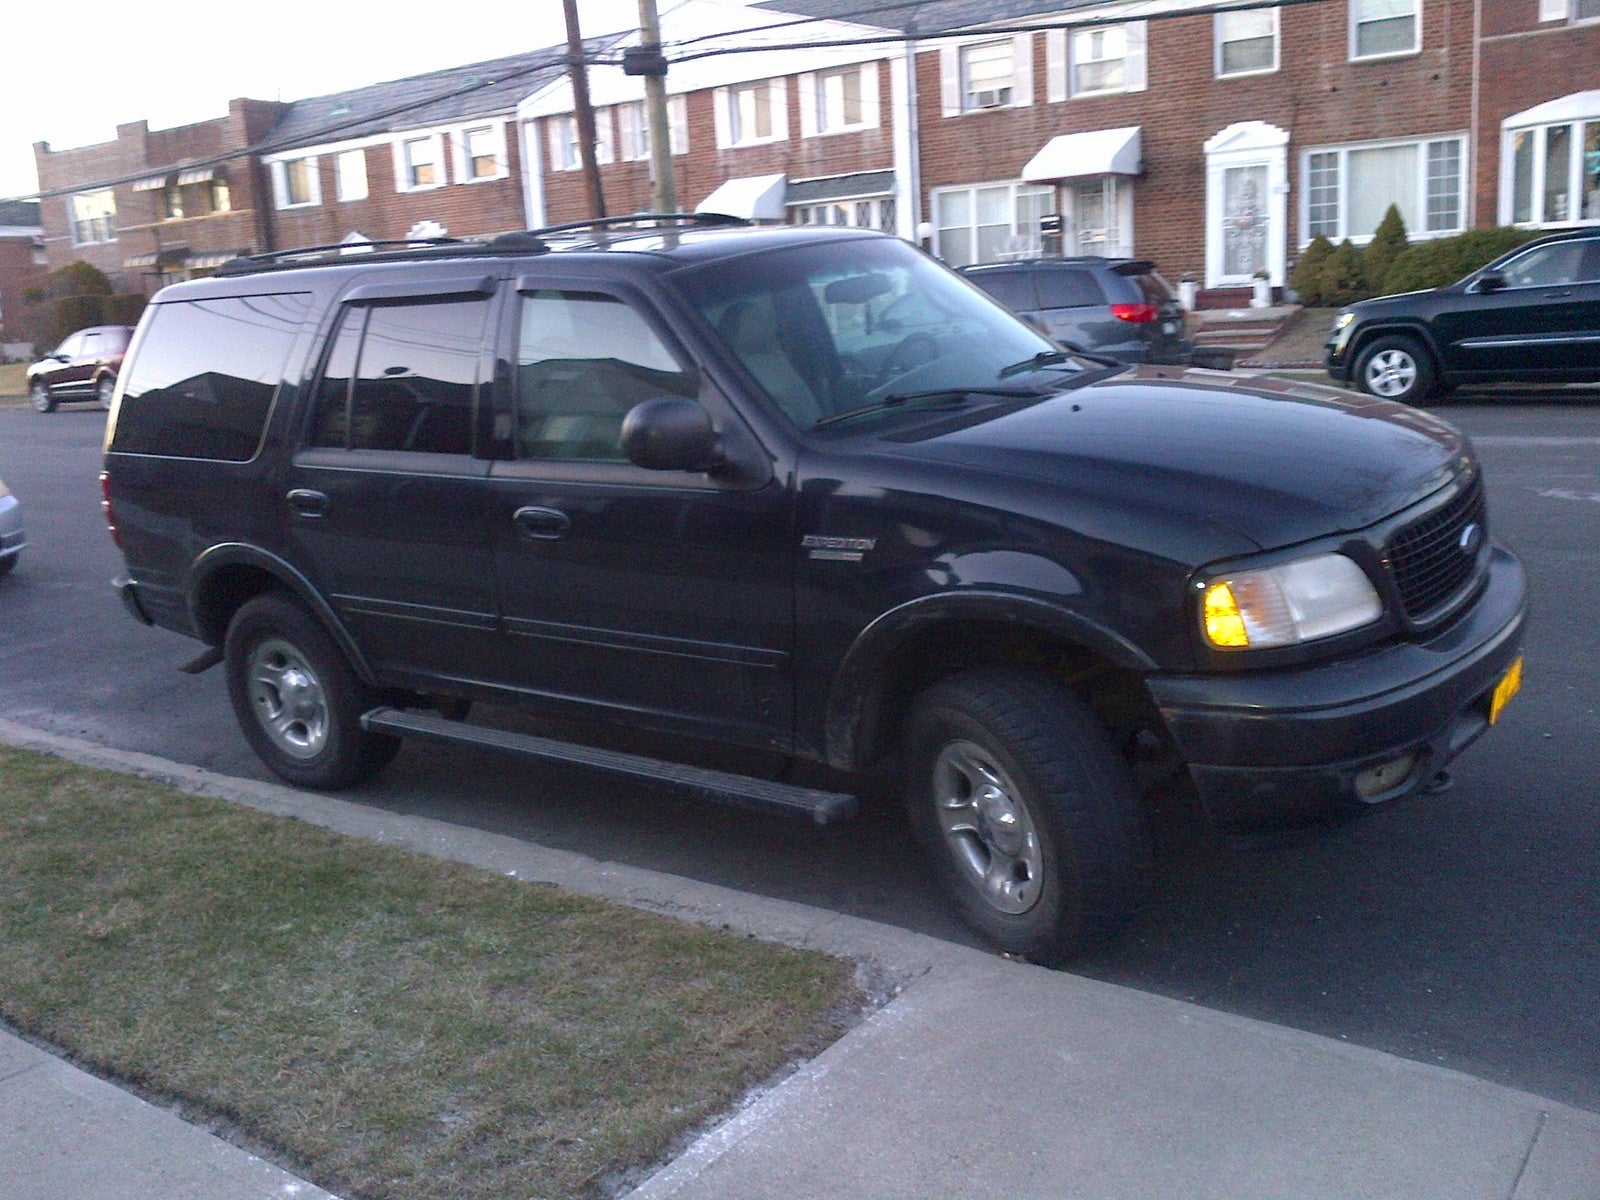 2003 Ford expedition recalls or electrical problems #7